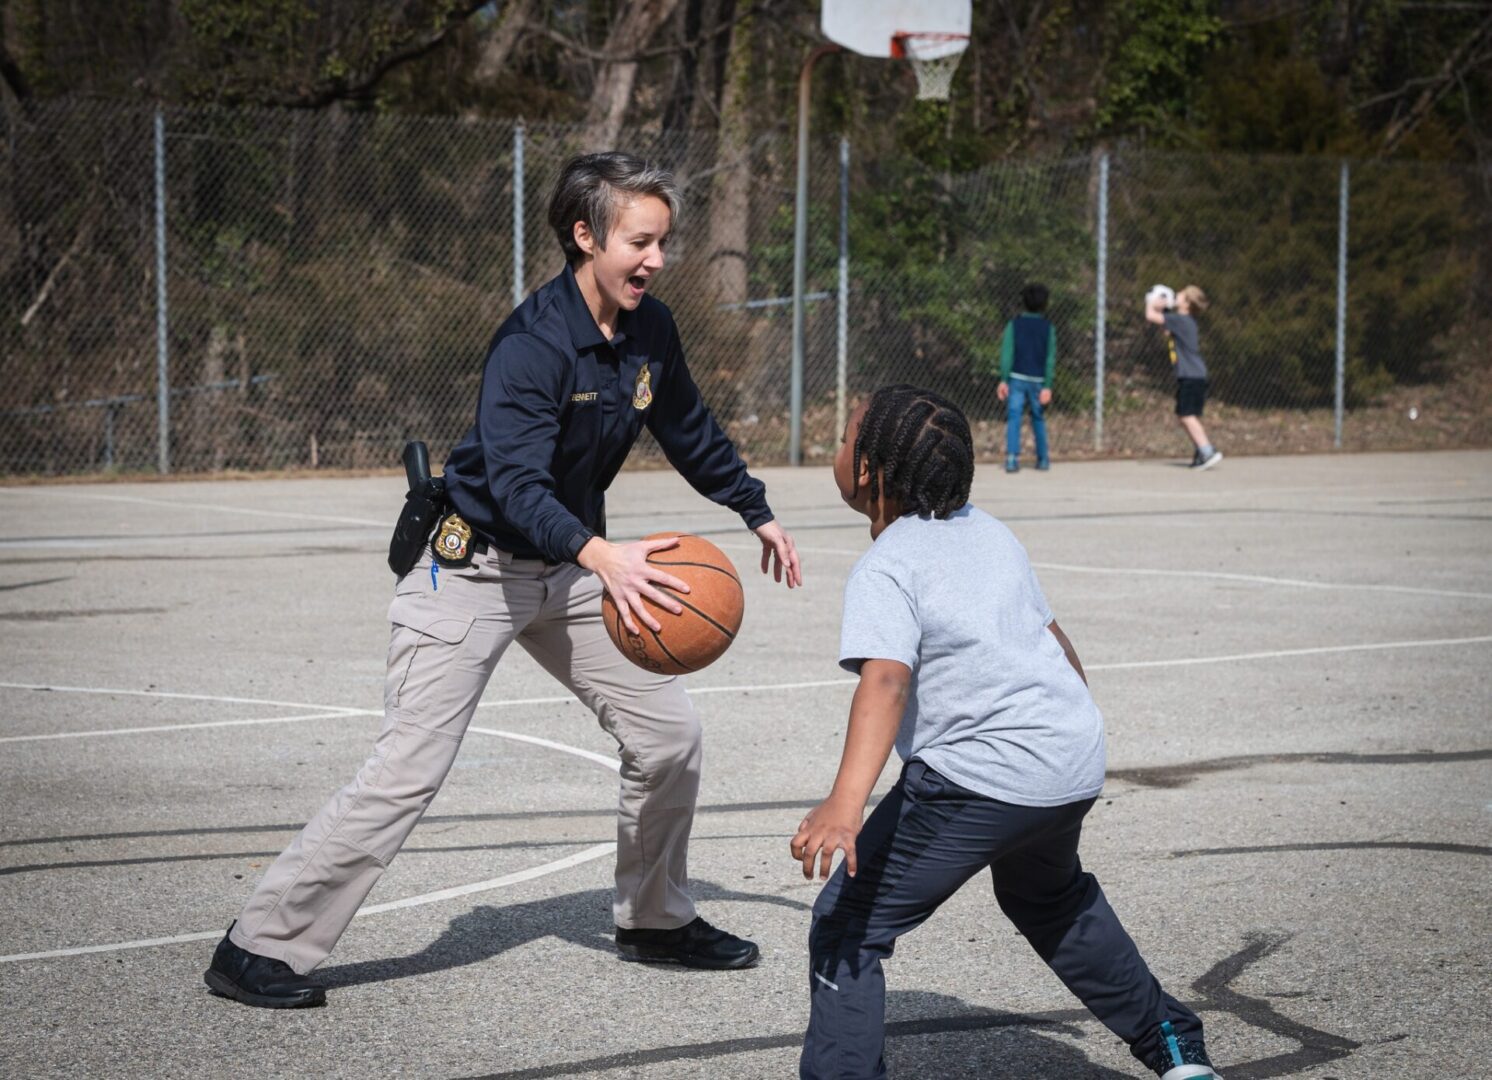 A police officer is participating in a community athletic program, playing basketball with a young boy.